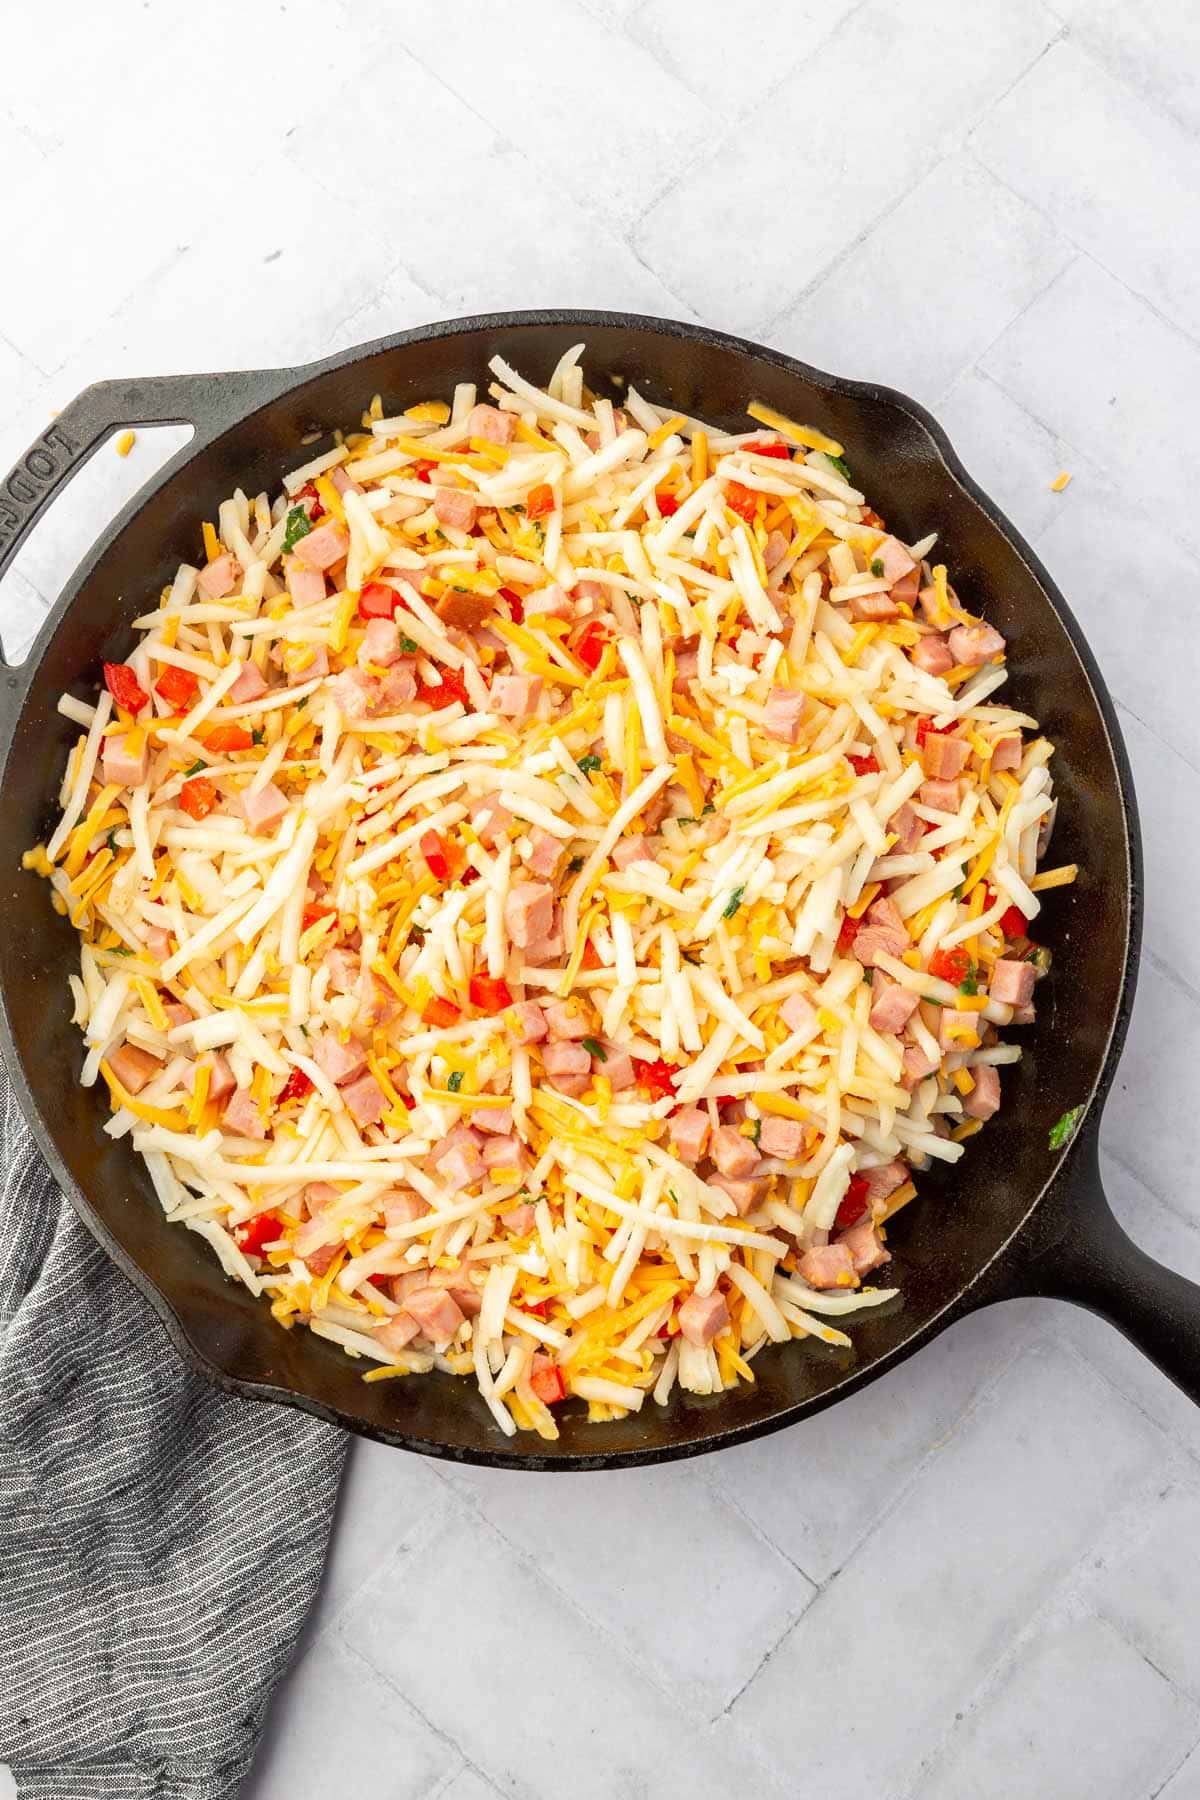 A cast iron skillet with hash browns, diced red bell pepper, shredded cheese, and cubed ham all mixed together.